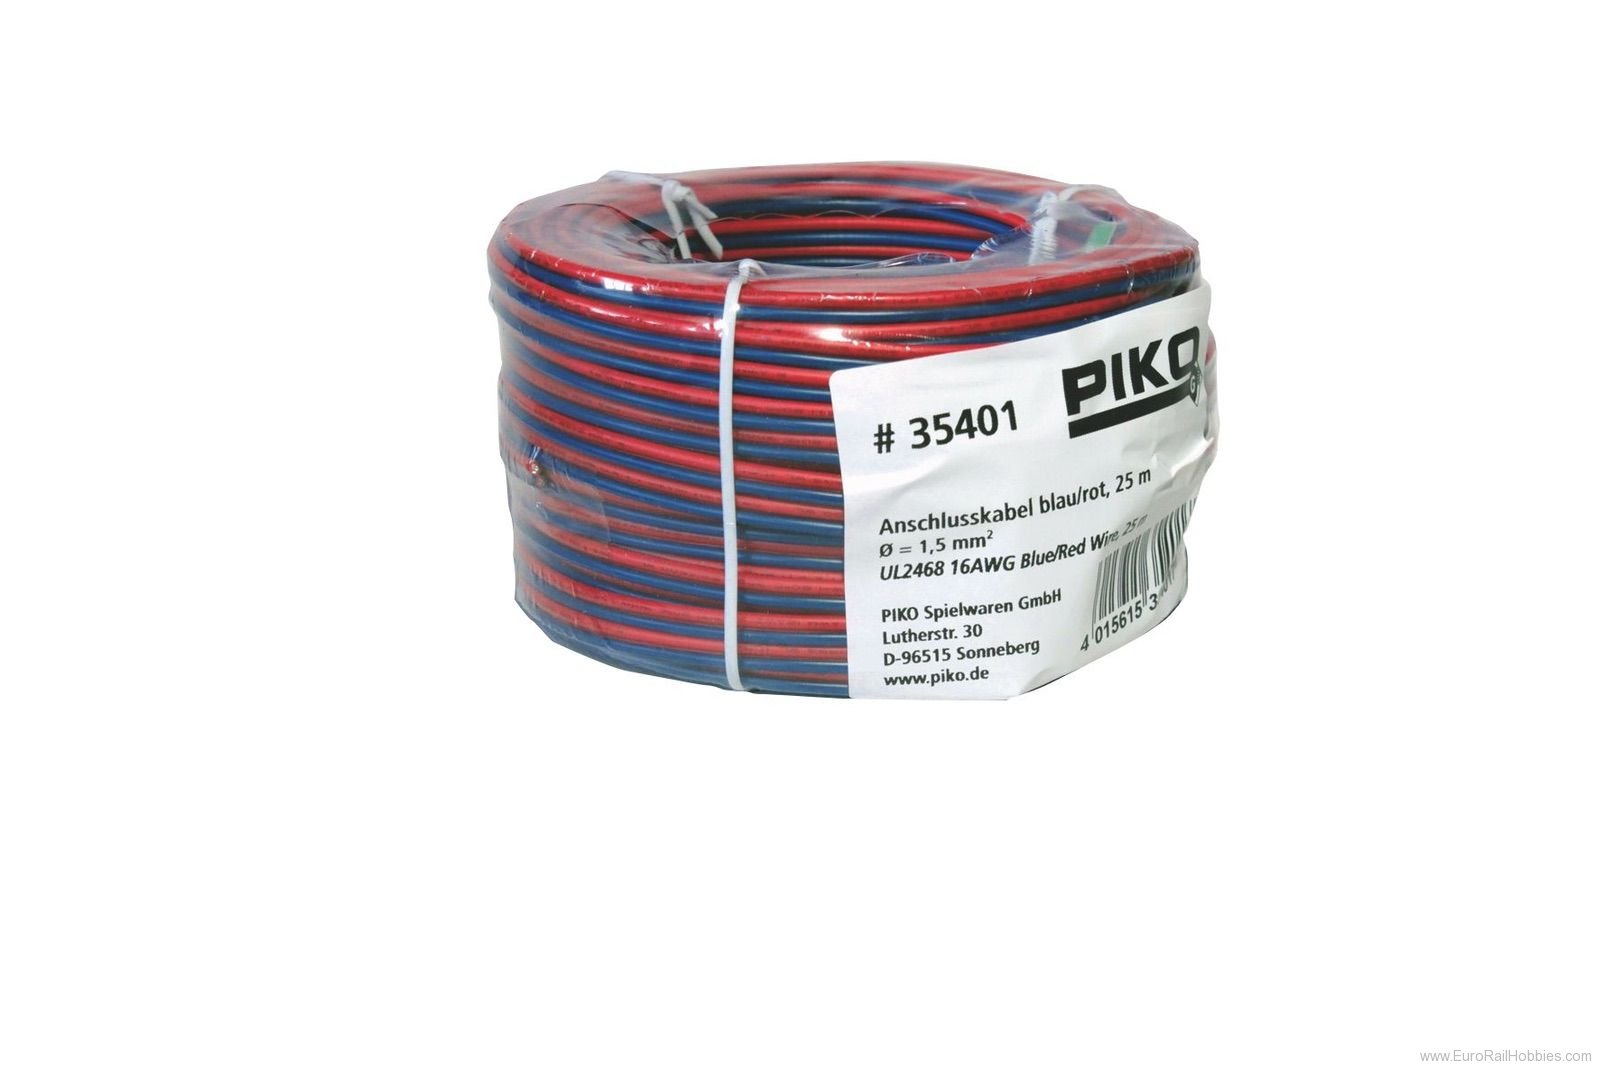 Piko 35401 Red/Blue Cable, 16AWG, 25m